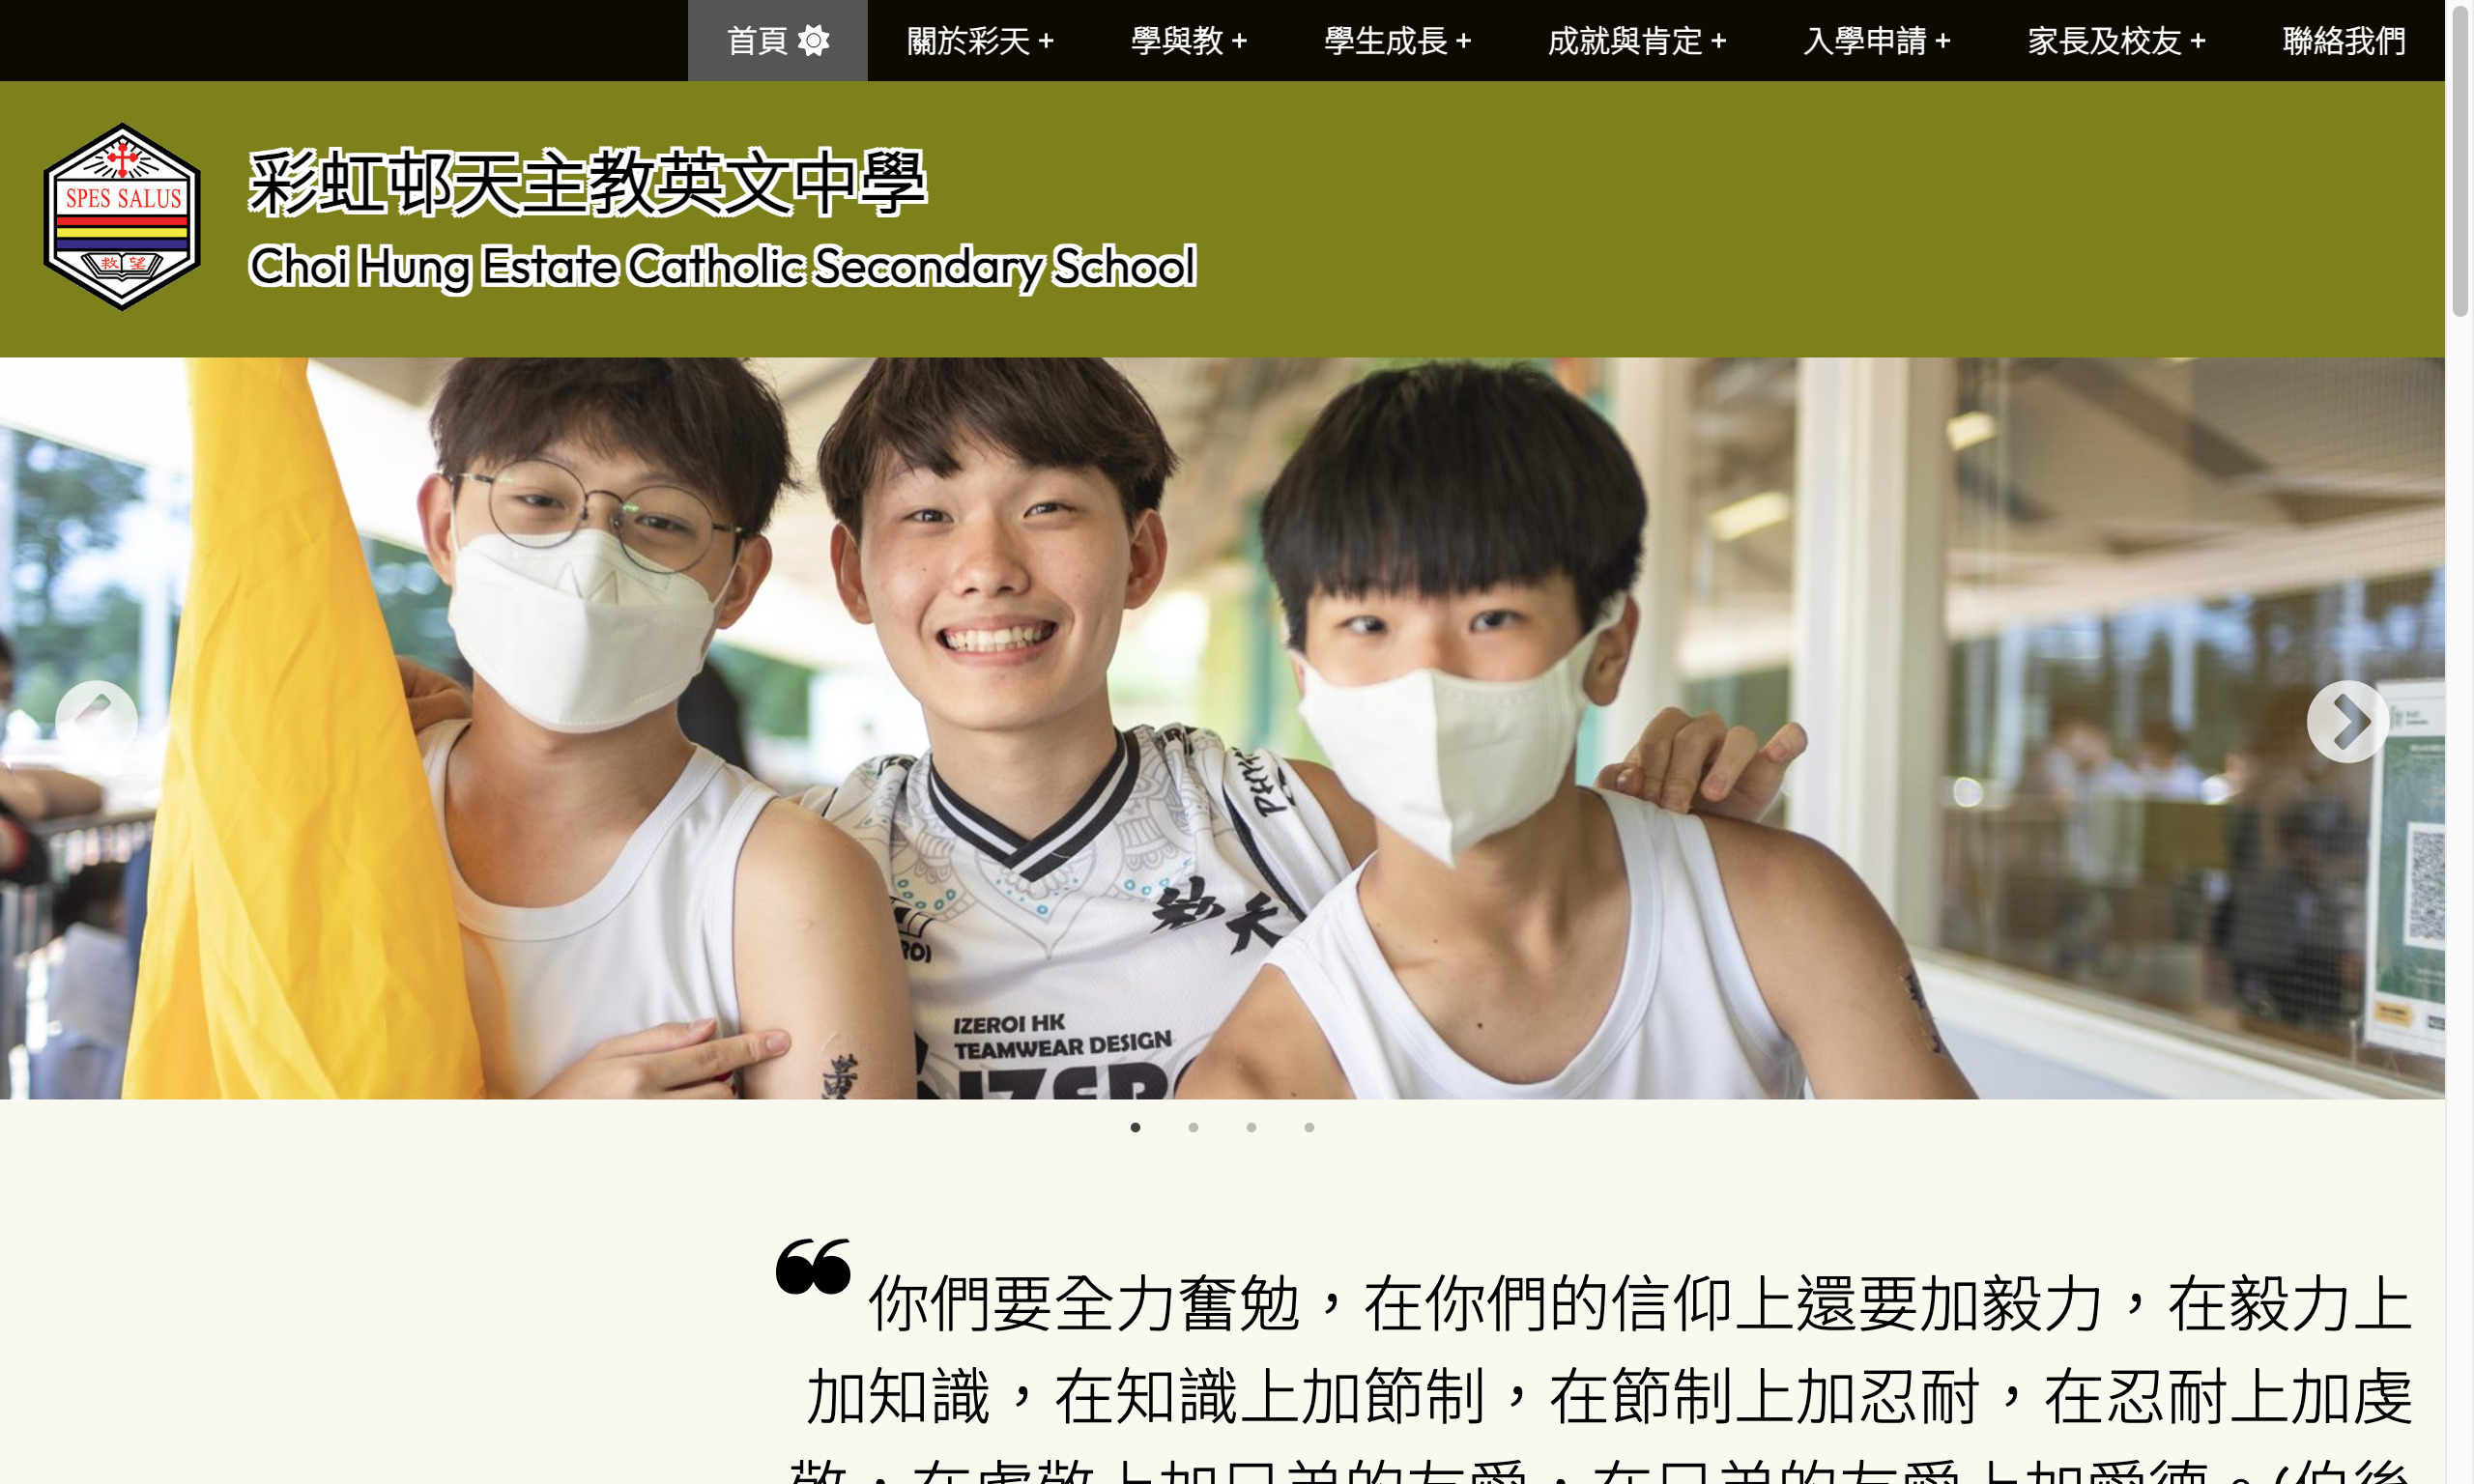 Screenshot of the Home Page of Choi Hung Estate Catholic Secondary School